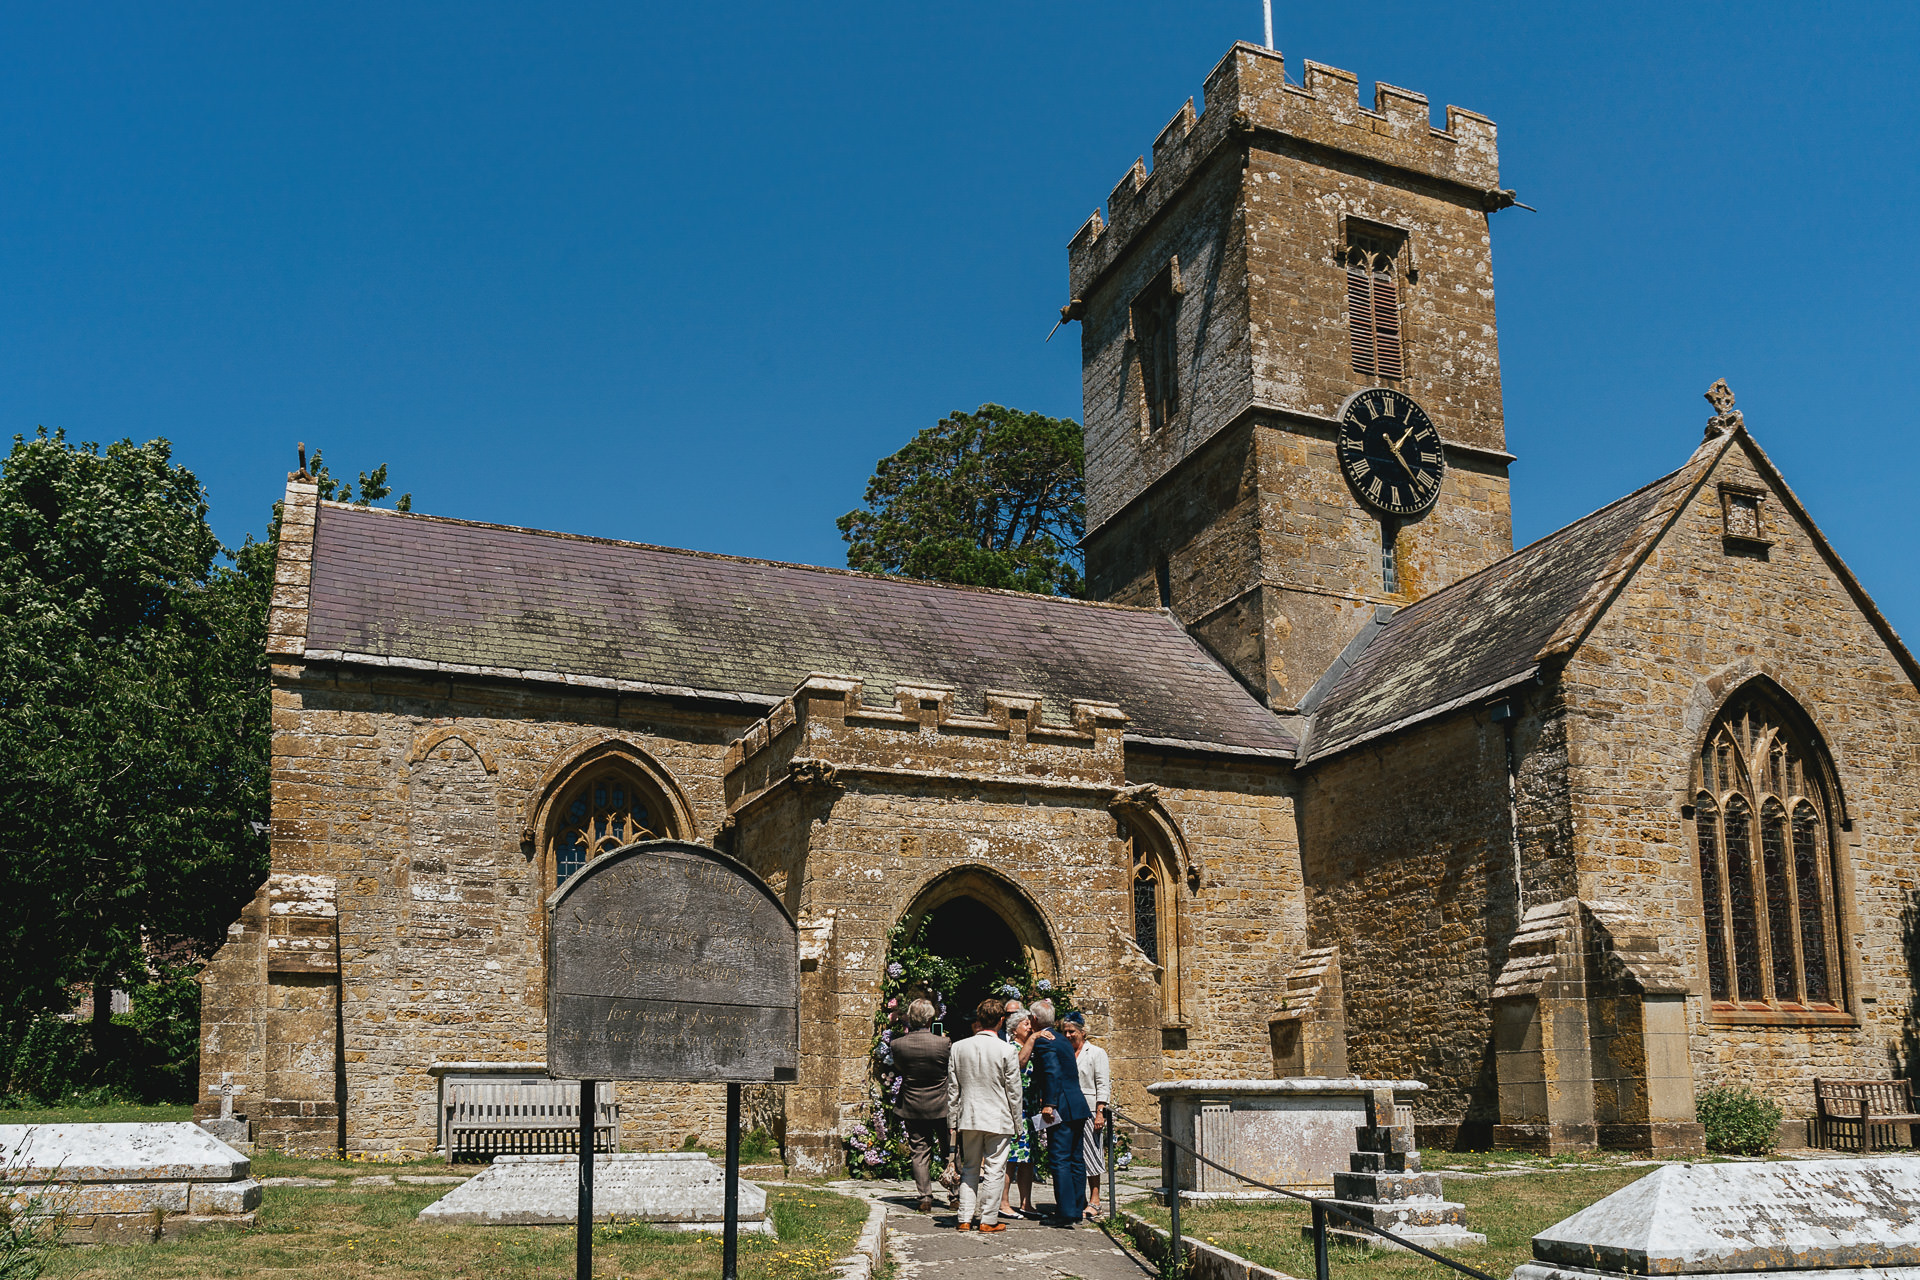 Guests arriving for a wedding at the church in Symondsbury, Dorset